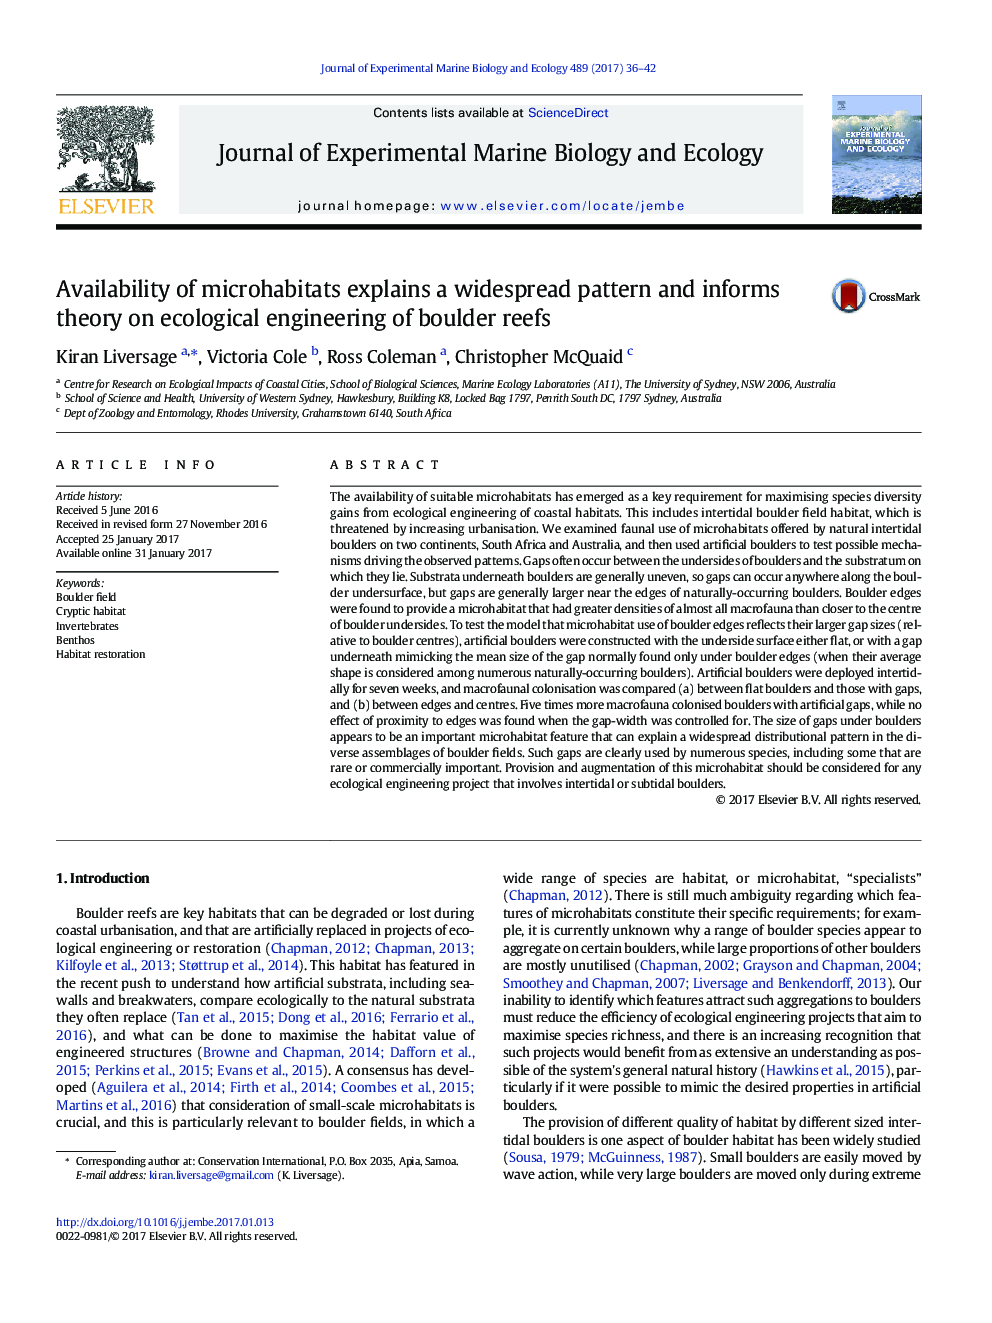 Availability of microhabitats explains a widespread pattern and informs theory on ecological engineering of boulder reefs